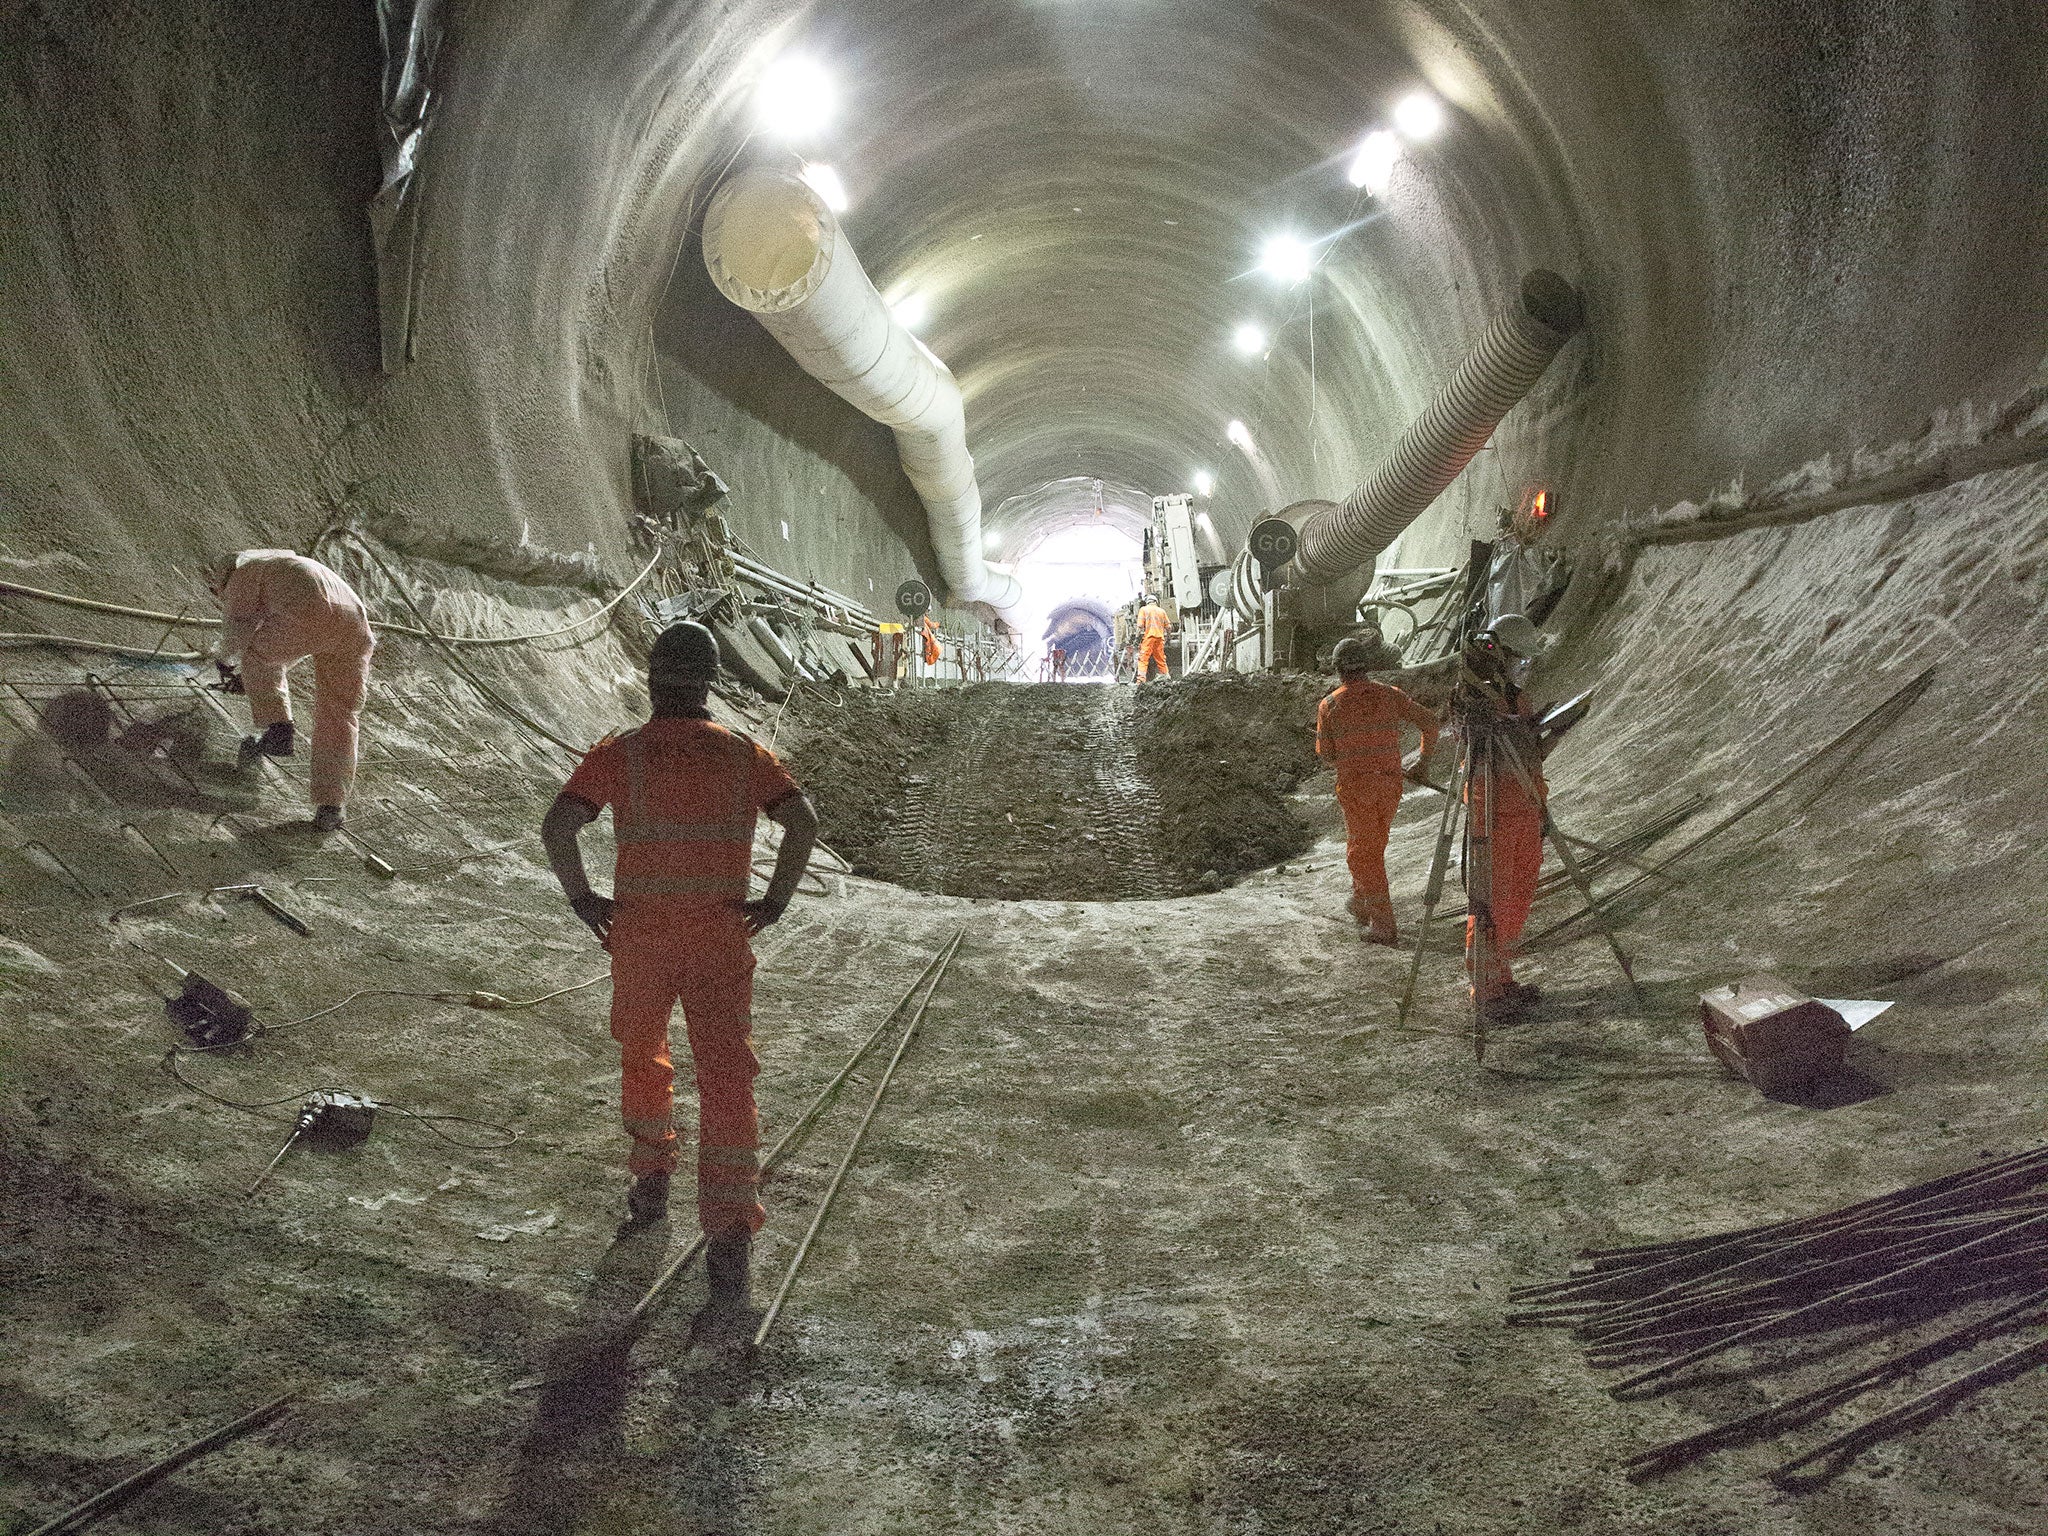 The Crossrail tunnels at Tottenham Court Road where one day the new line may intersect with a proposed North-South Crossrail 2